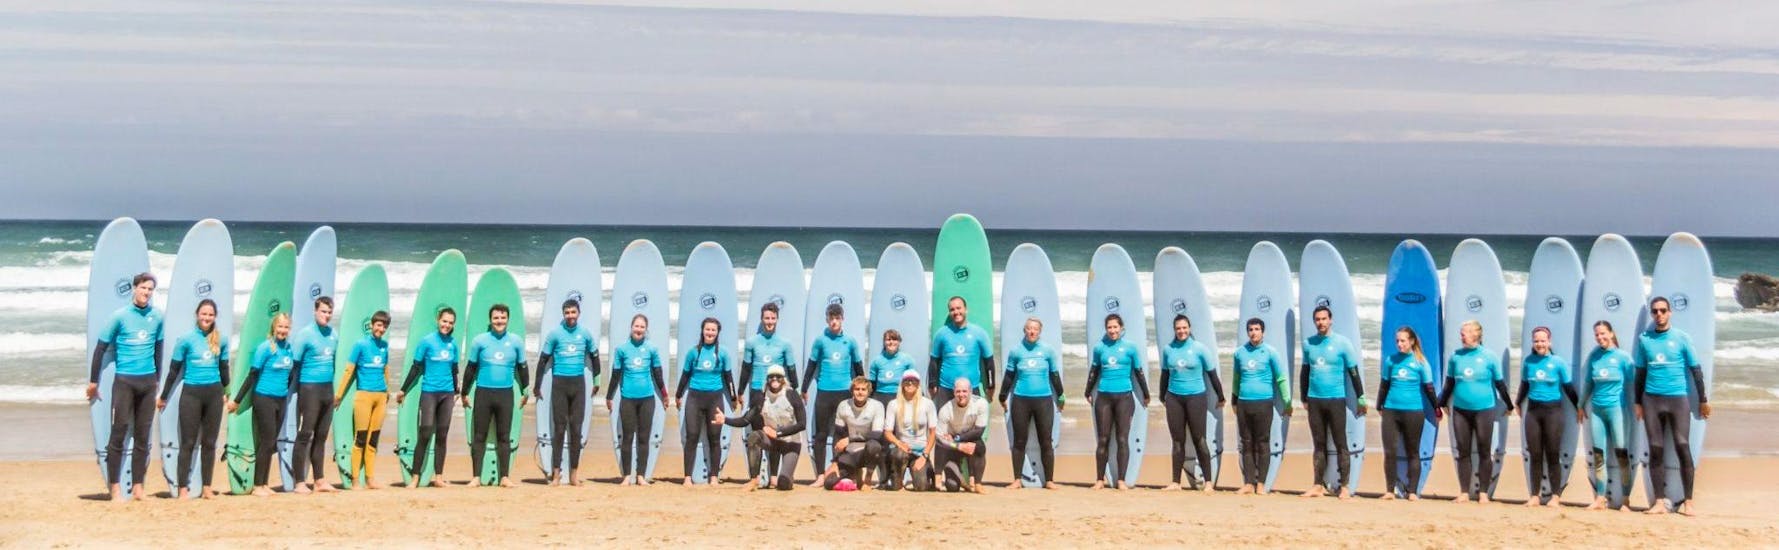 Wavesensations Sagres at a Full Day Private Surfing Lessons for Kids (6-12 y.) in Sagres.